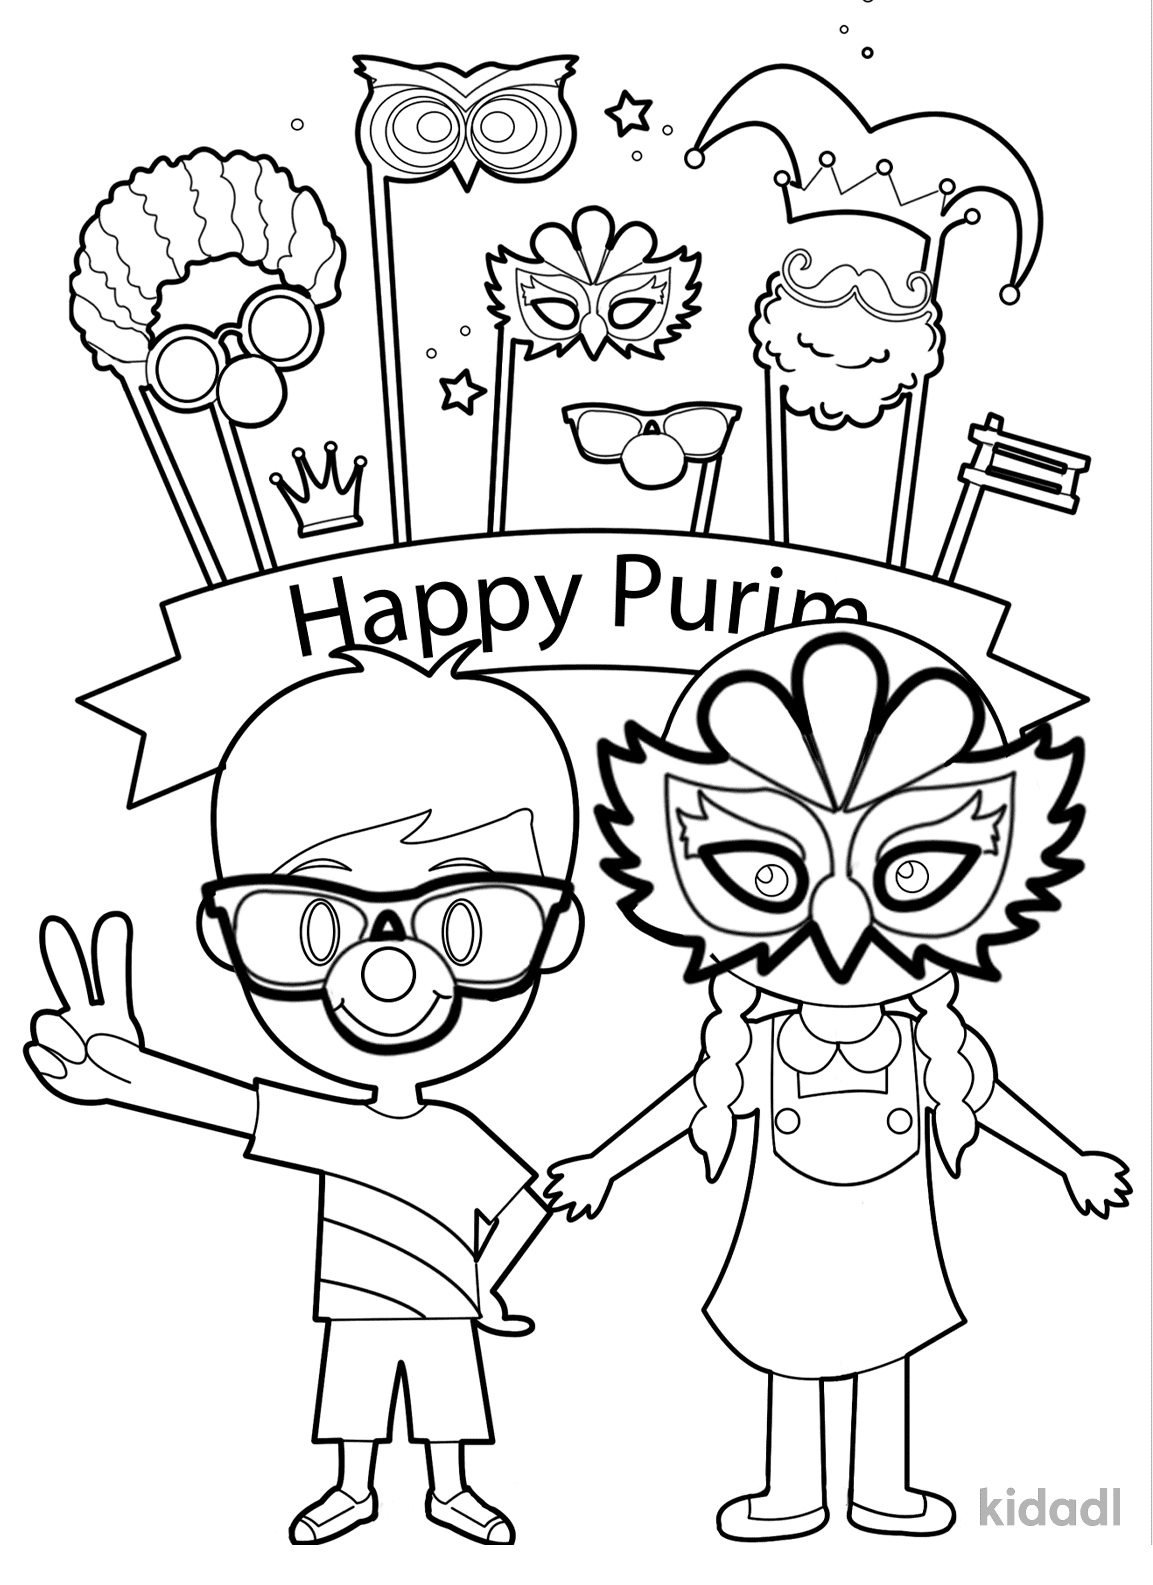 Happy Purim Kids Coloring Page